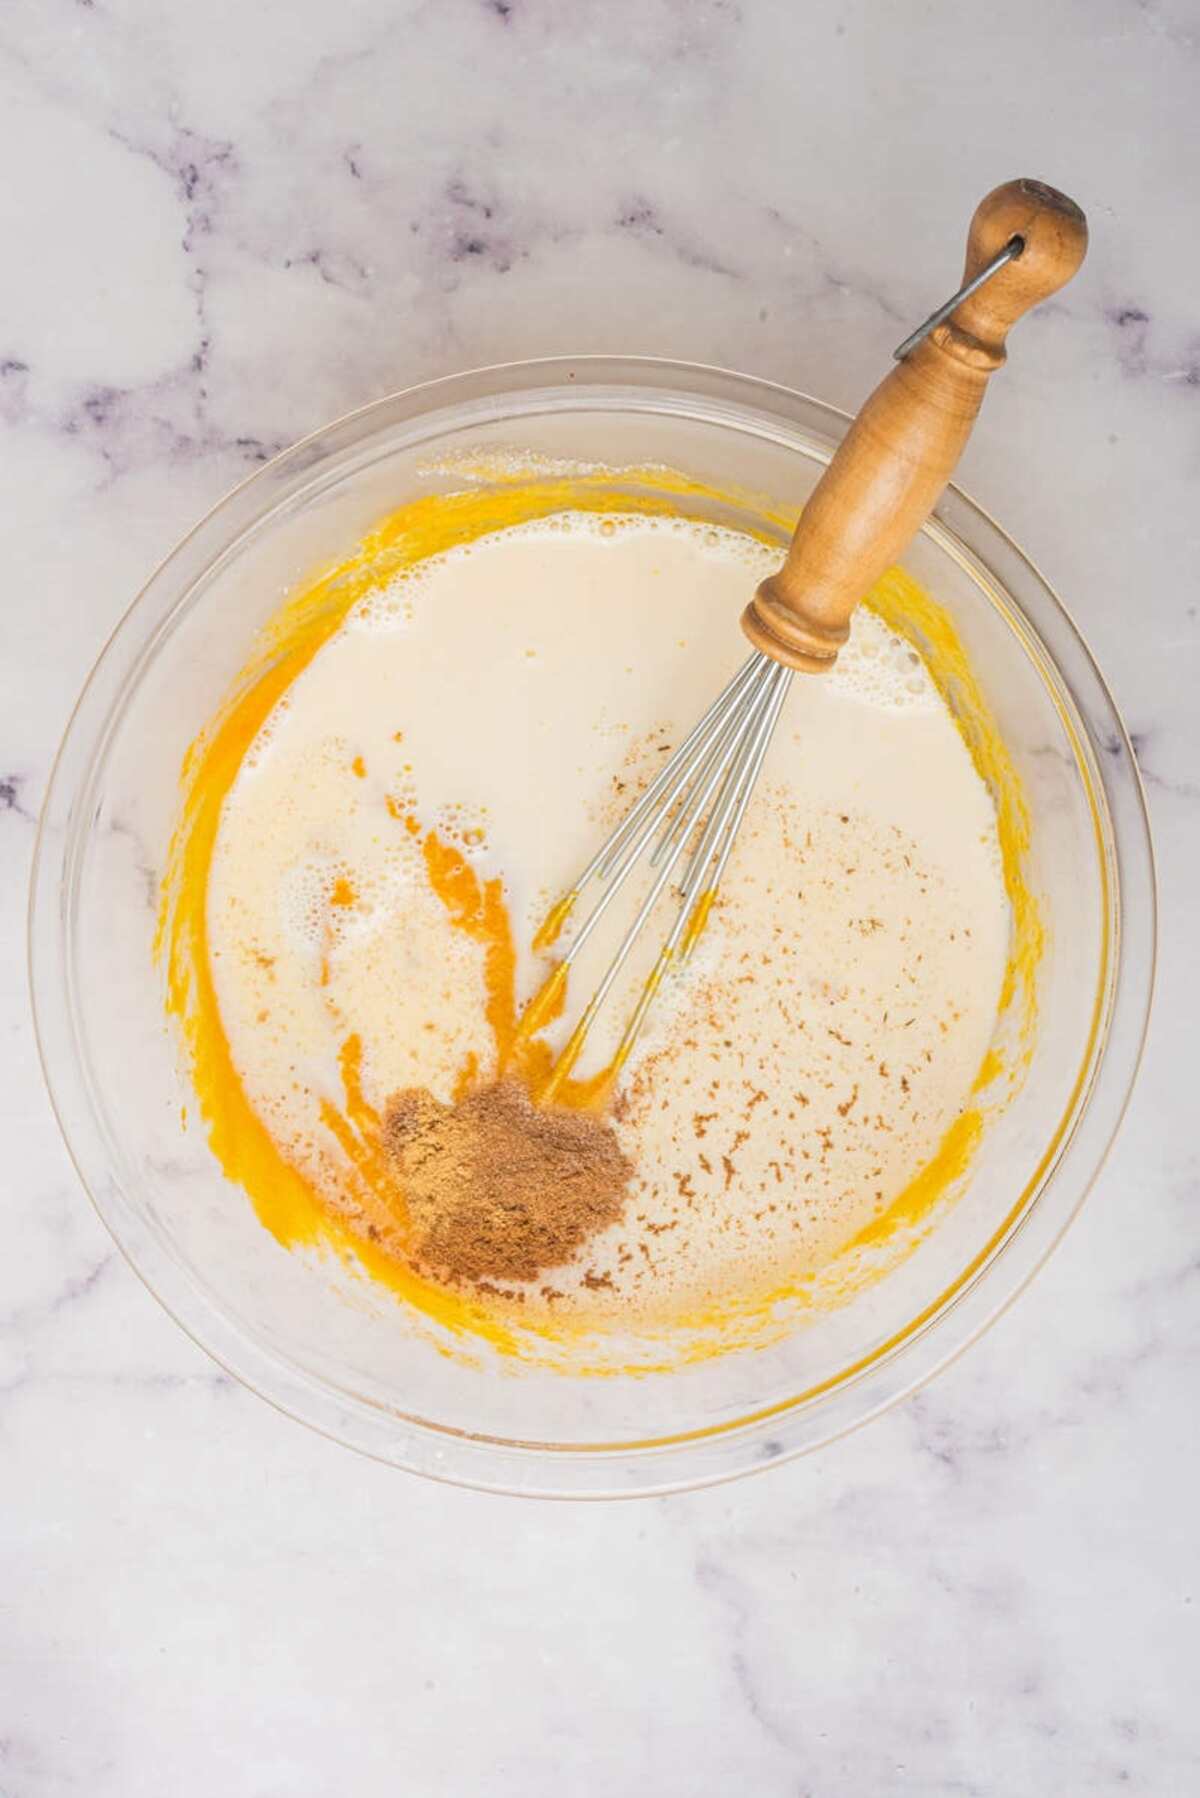 Adding spices to the pumpkin pie filling mixture in a glass bowl with a whisk.